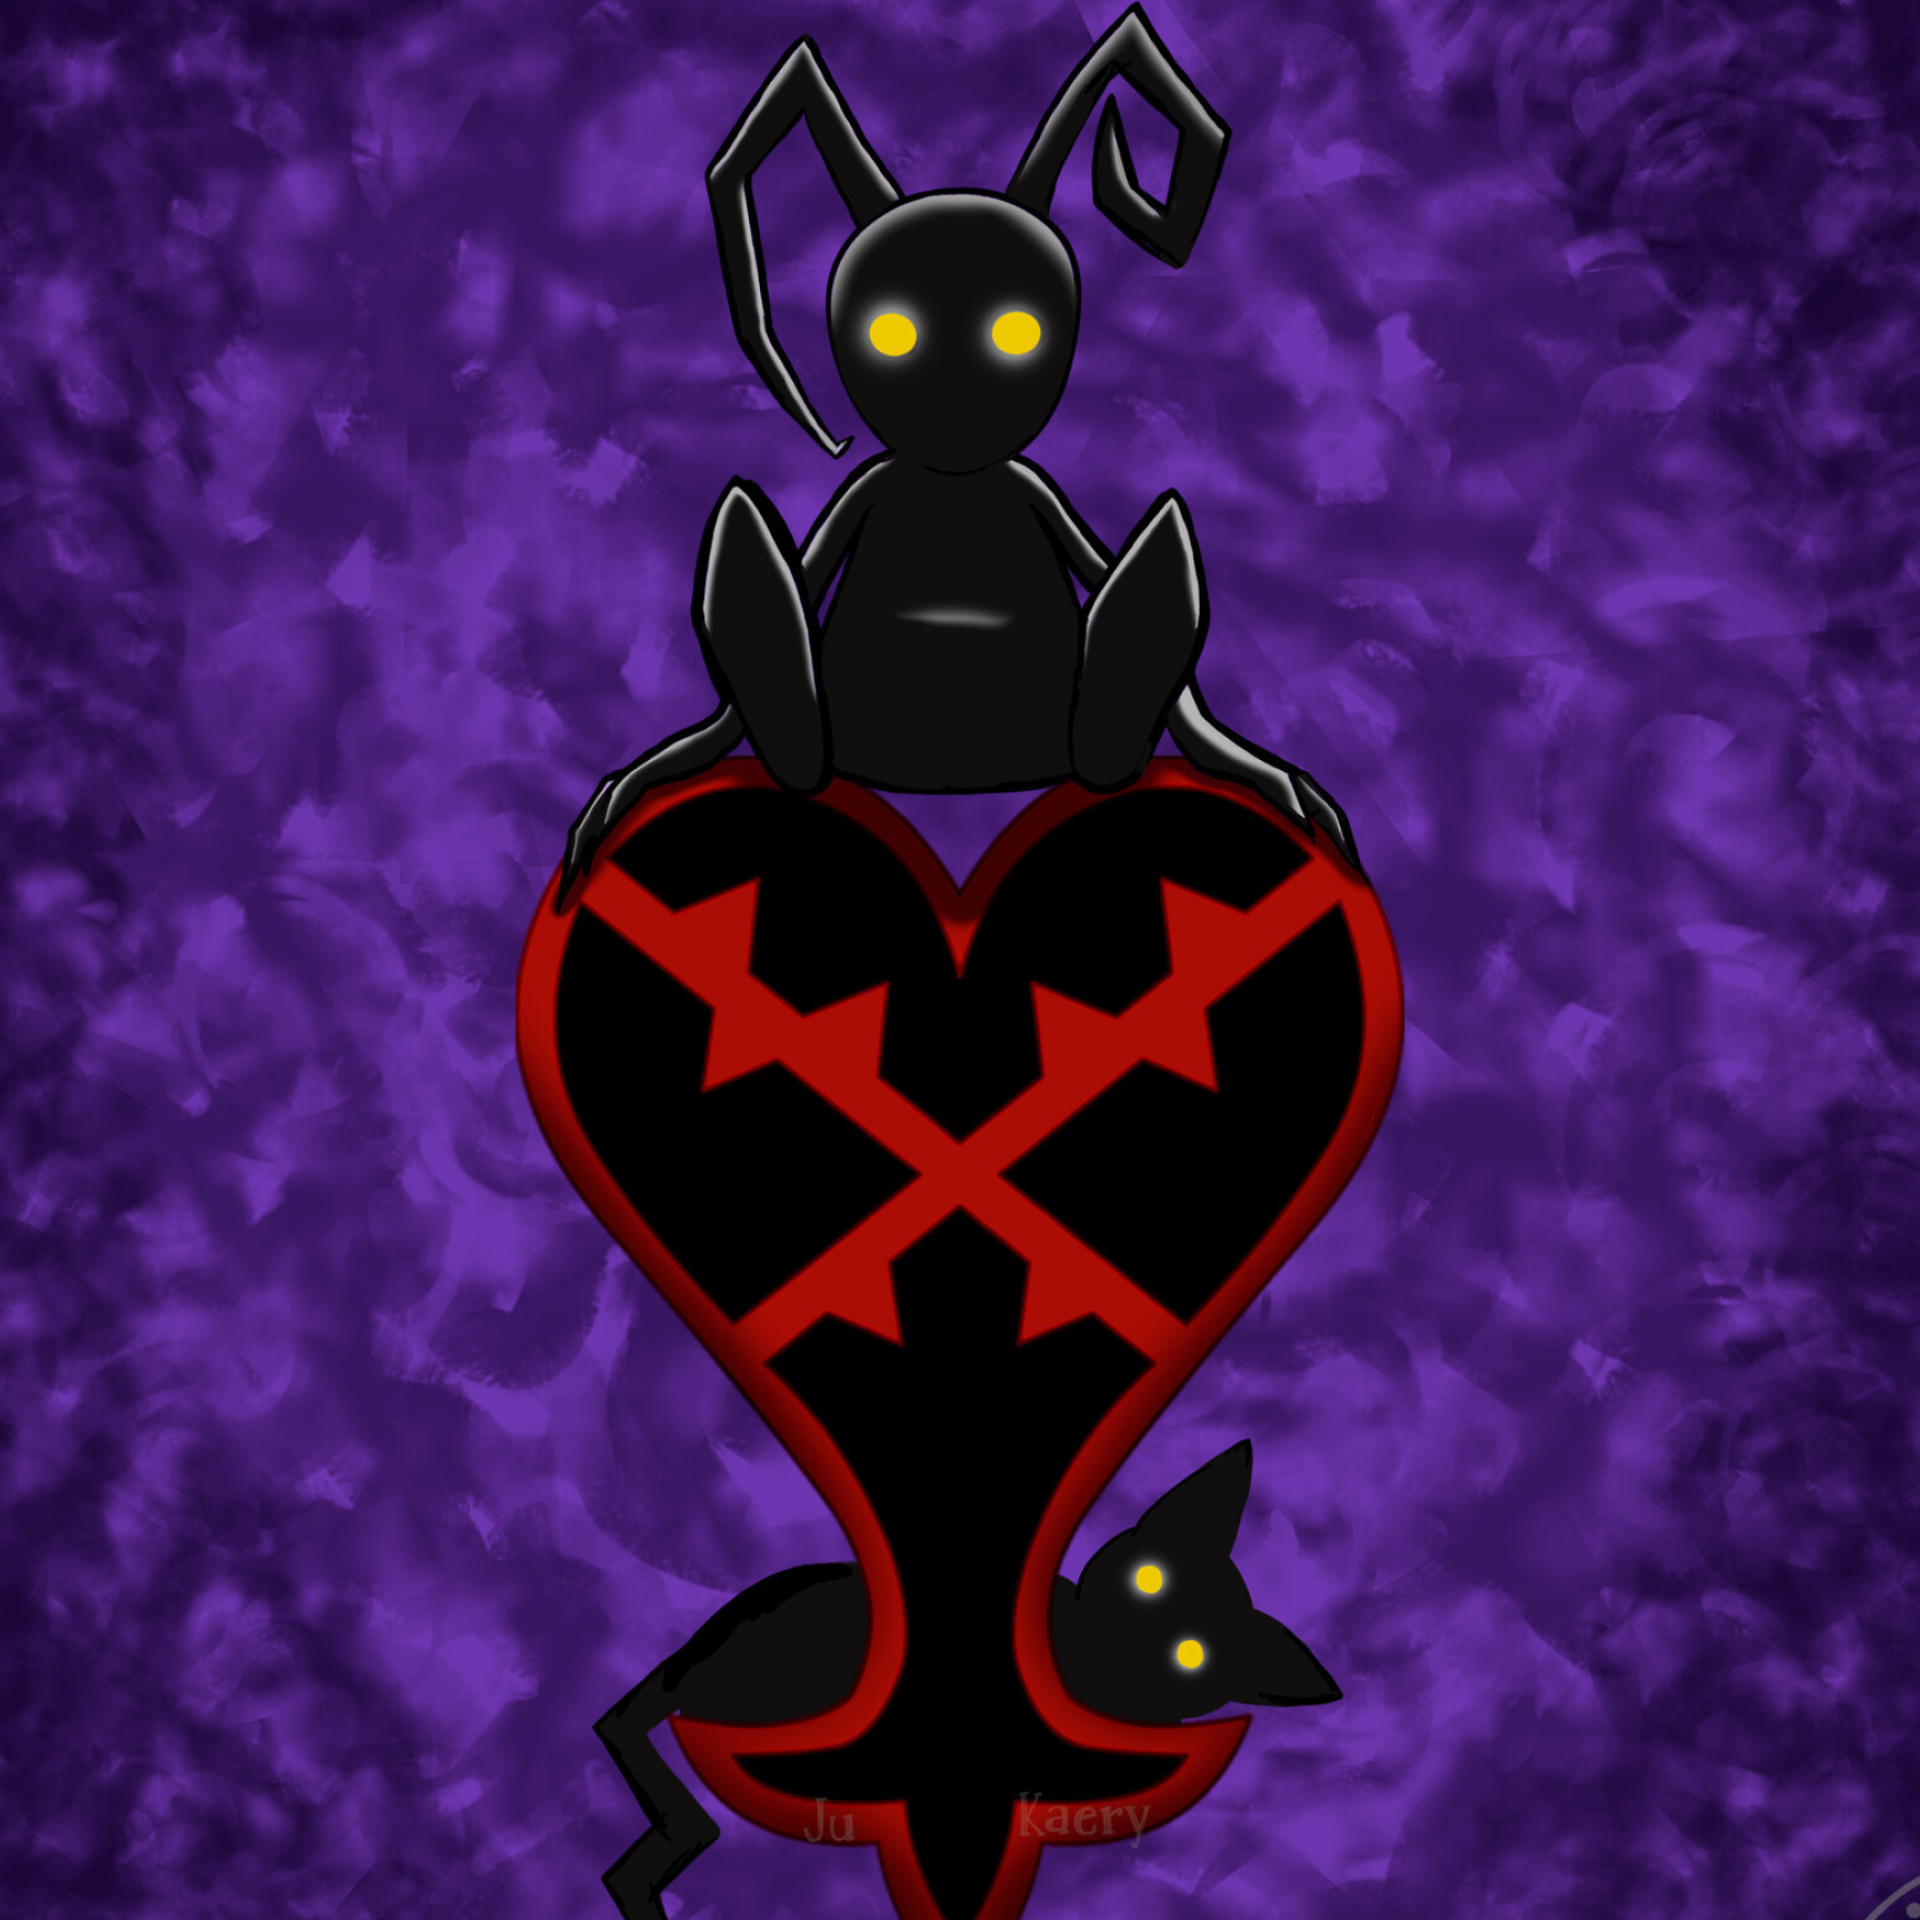 Heartless (Kingdom Hearts), Kingdom Hearts fan art, Eerie and captivating, ArtStation submission, 1920x1920 HD Phone